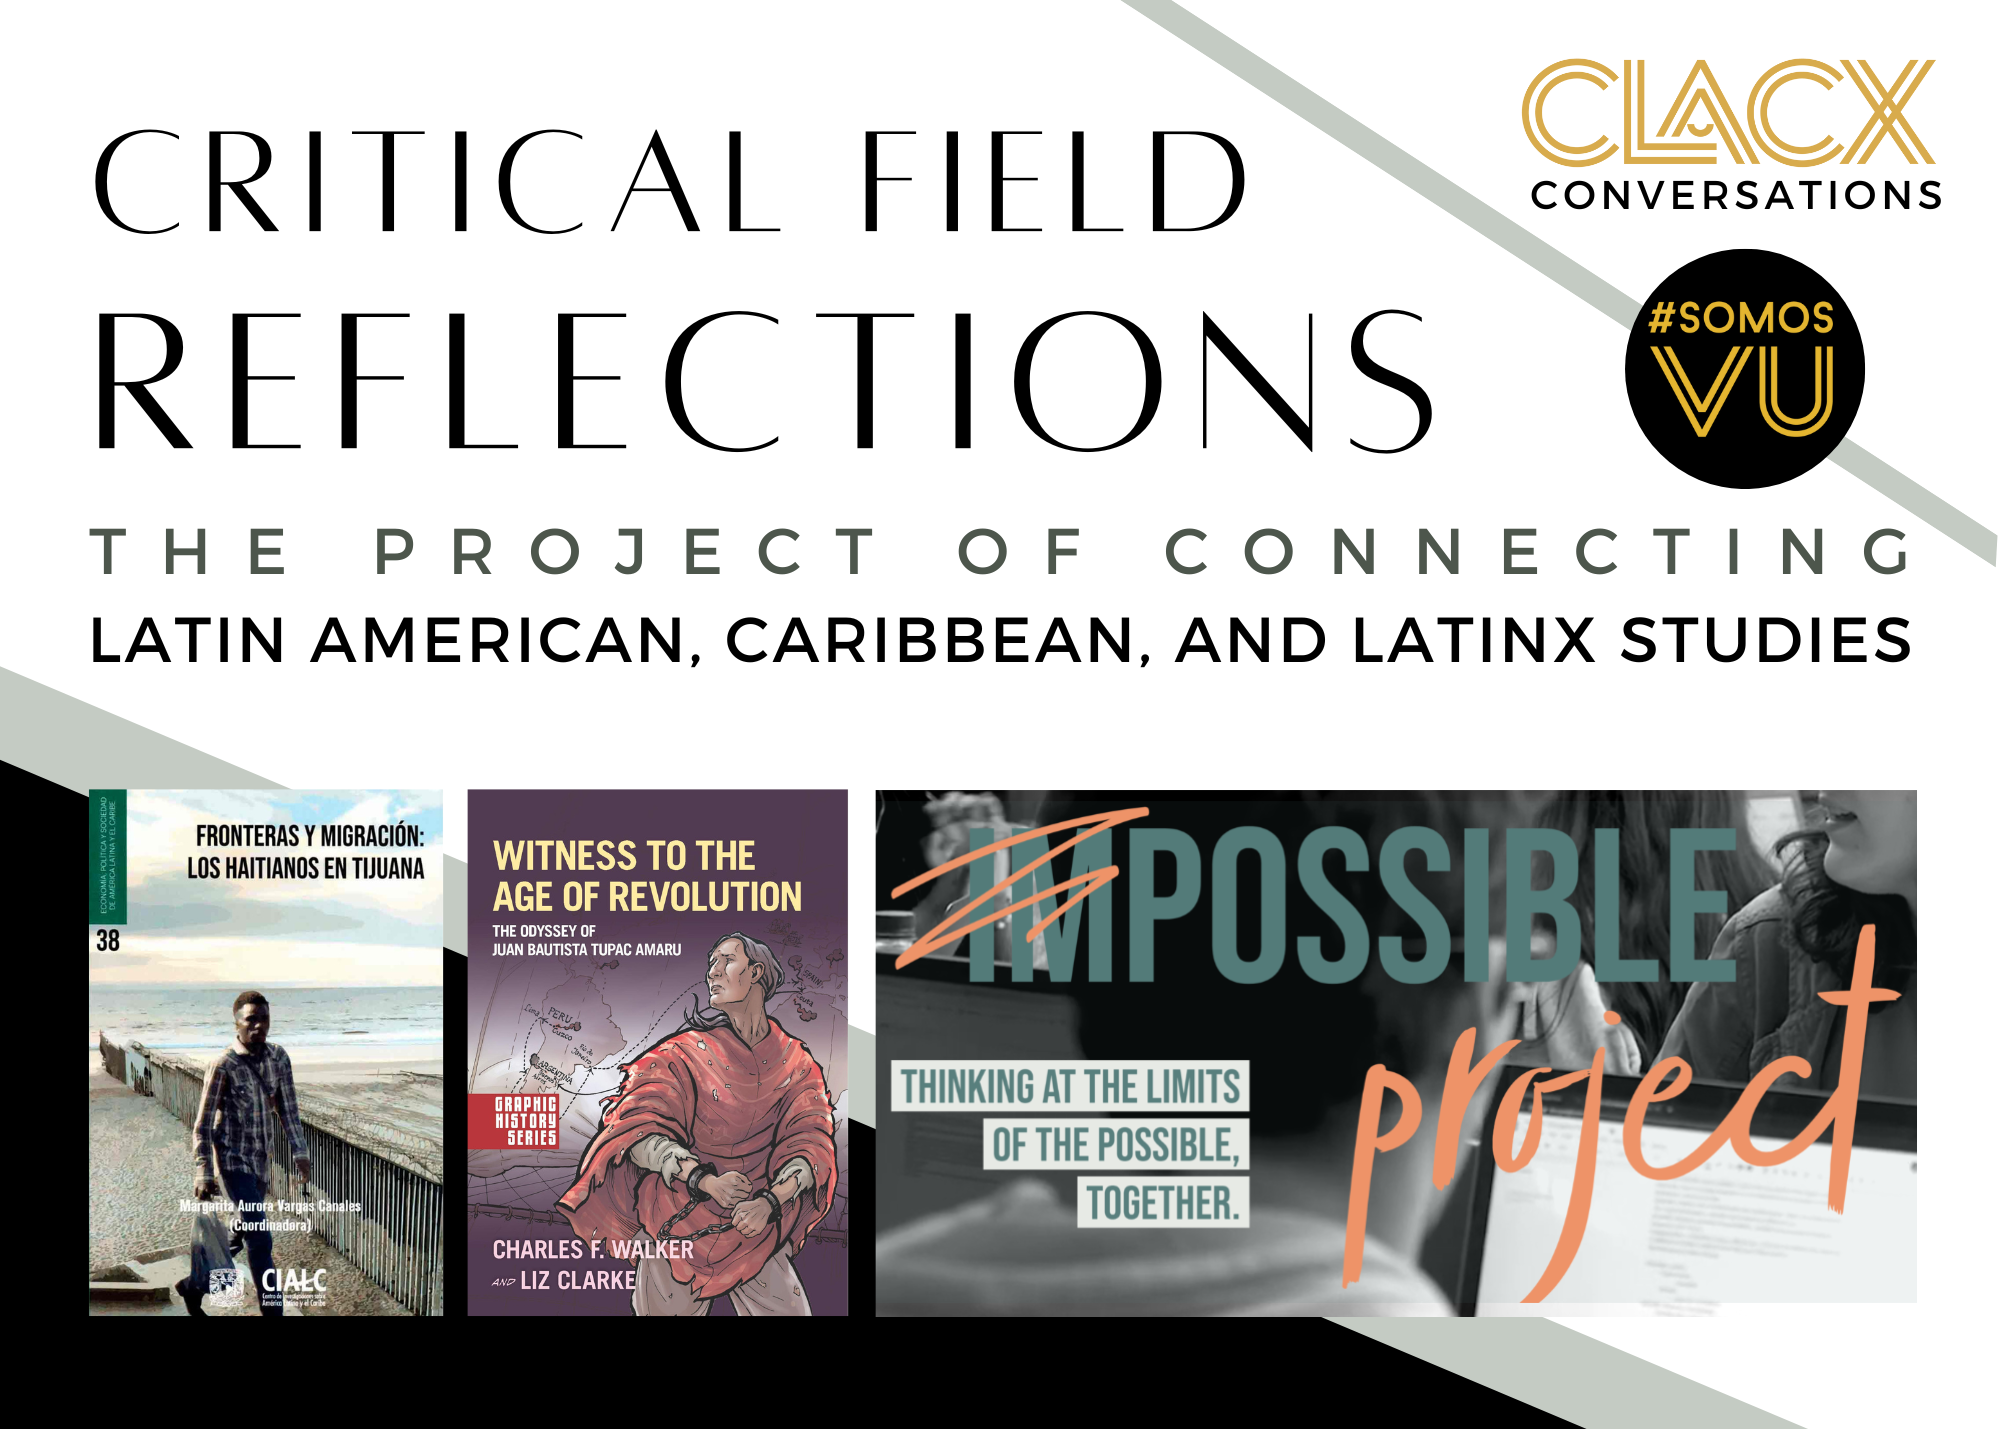 CLACX organizes “Critical Field Reflections” symposium Sept. 22-23